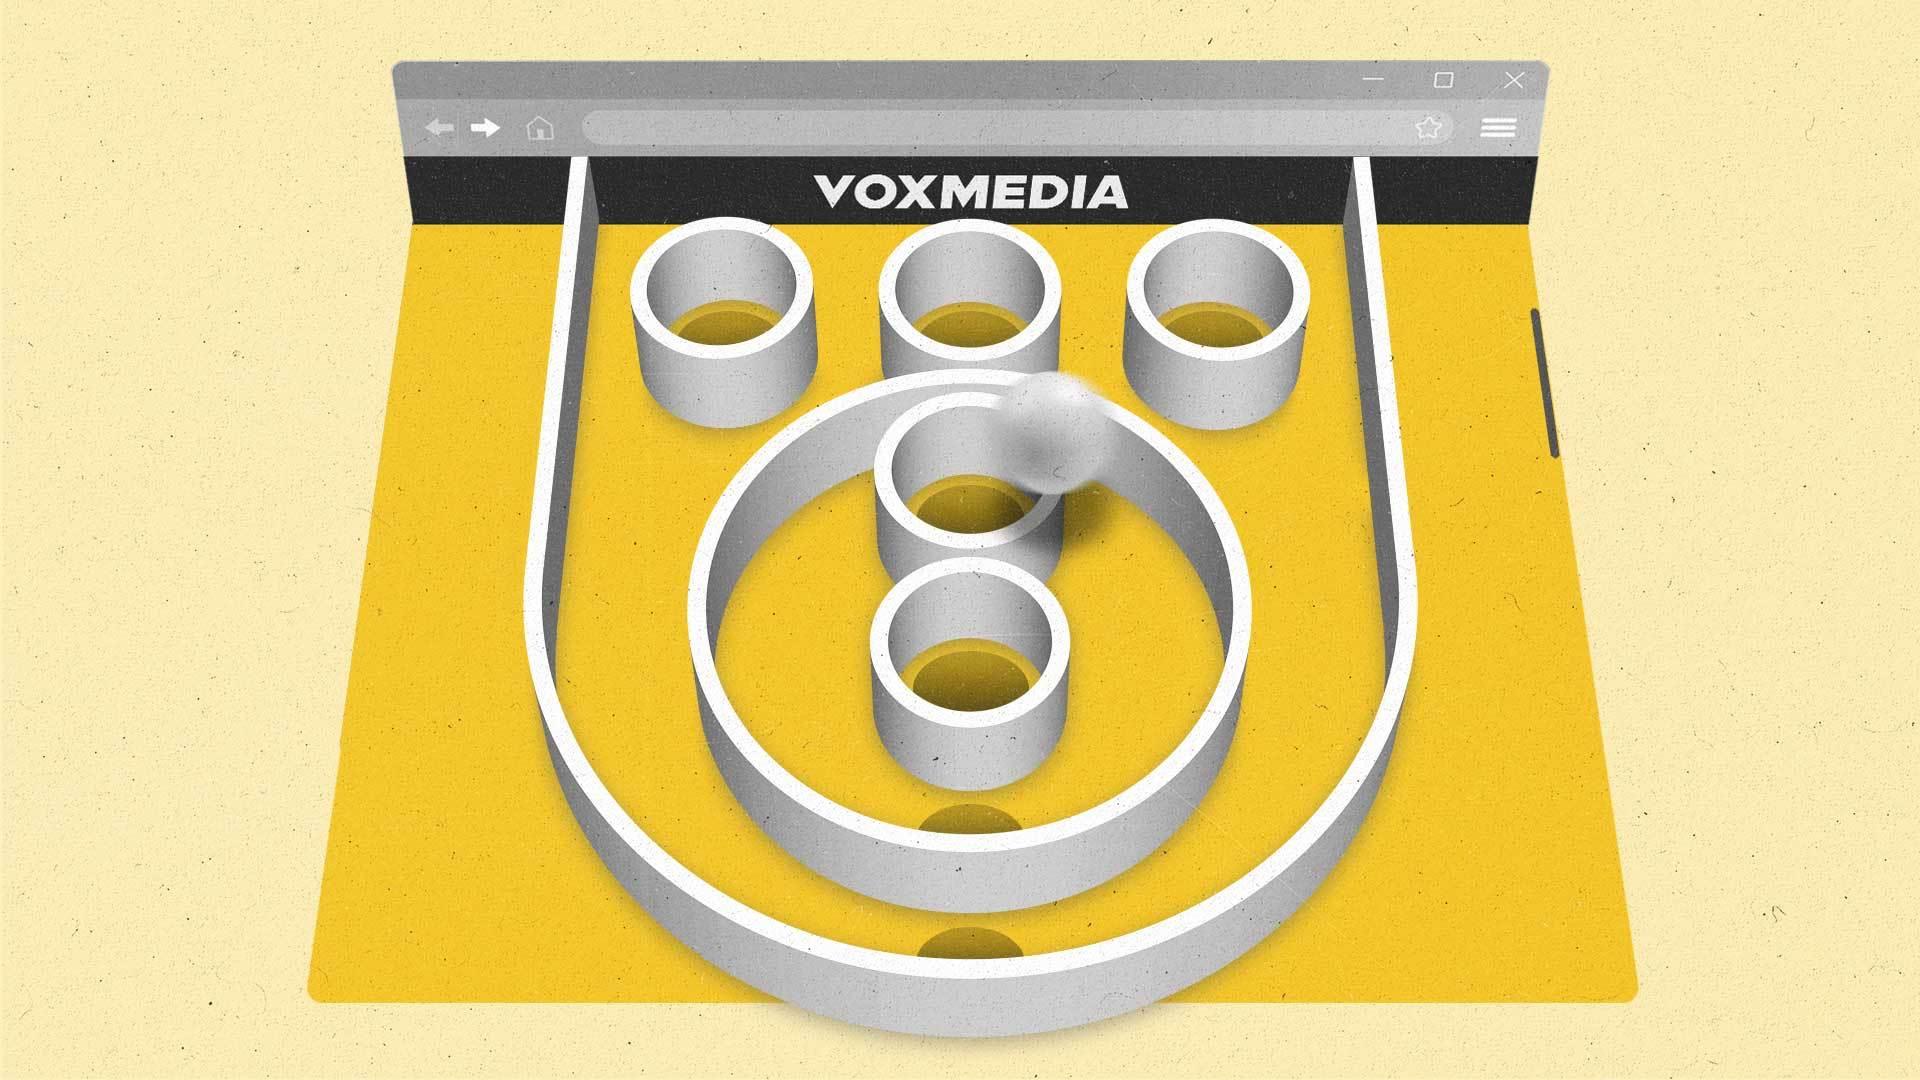 Vox Media on building its own SSP and adopting Unified ID 2.0